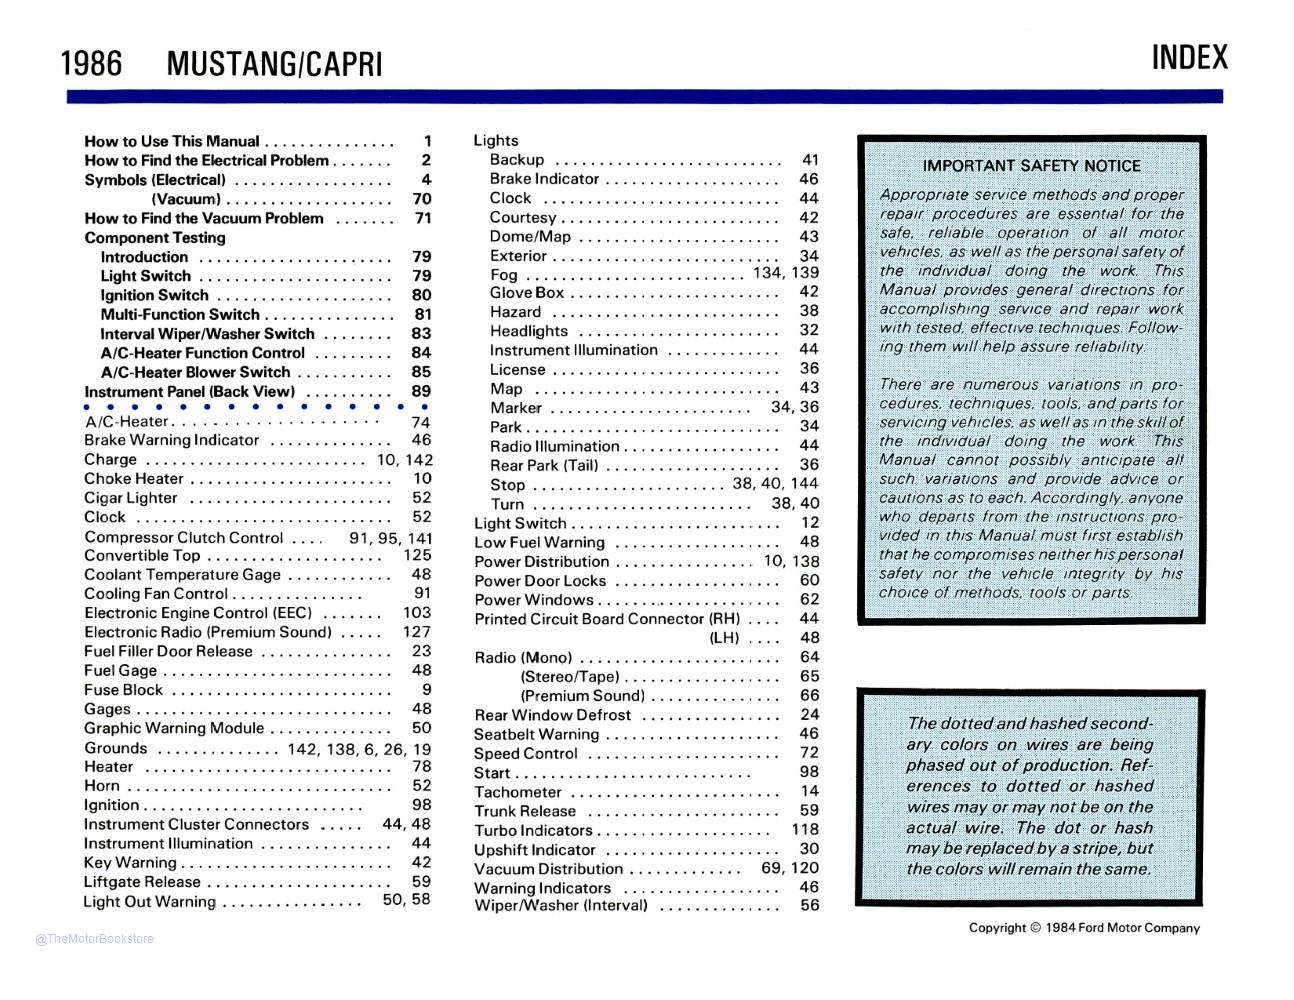 1986 Ford Mustang Capri Electrical Vacuum Troubleshooting Manual  - Table of Contents